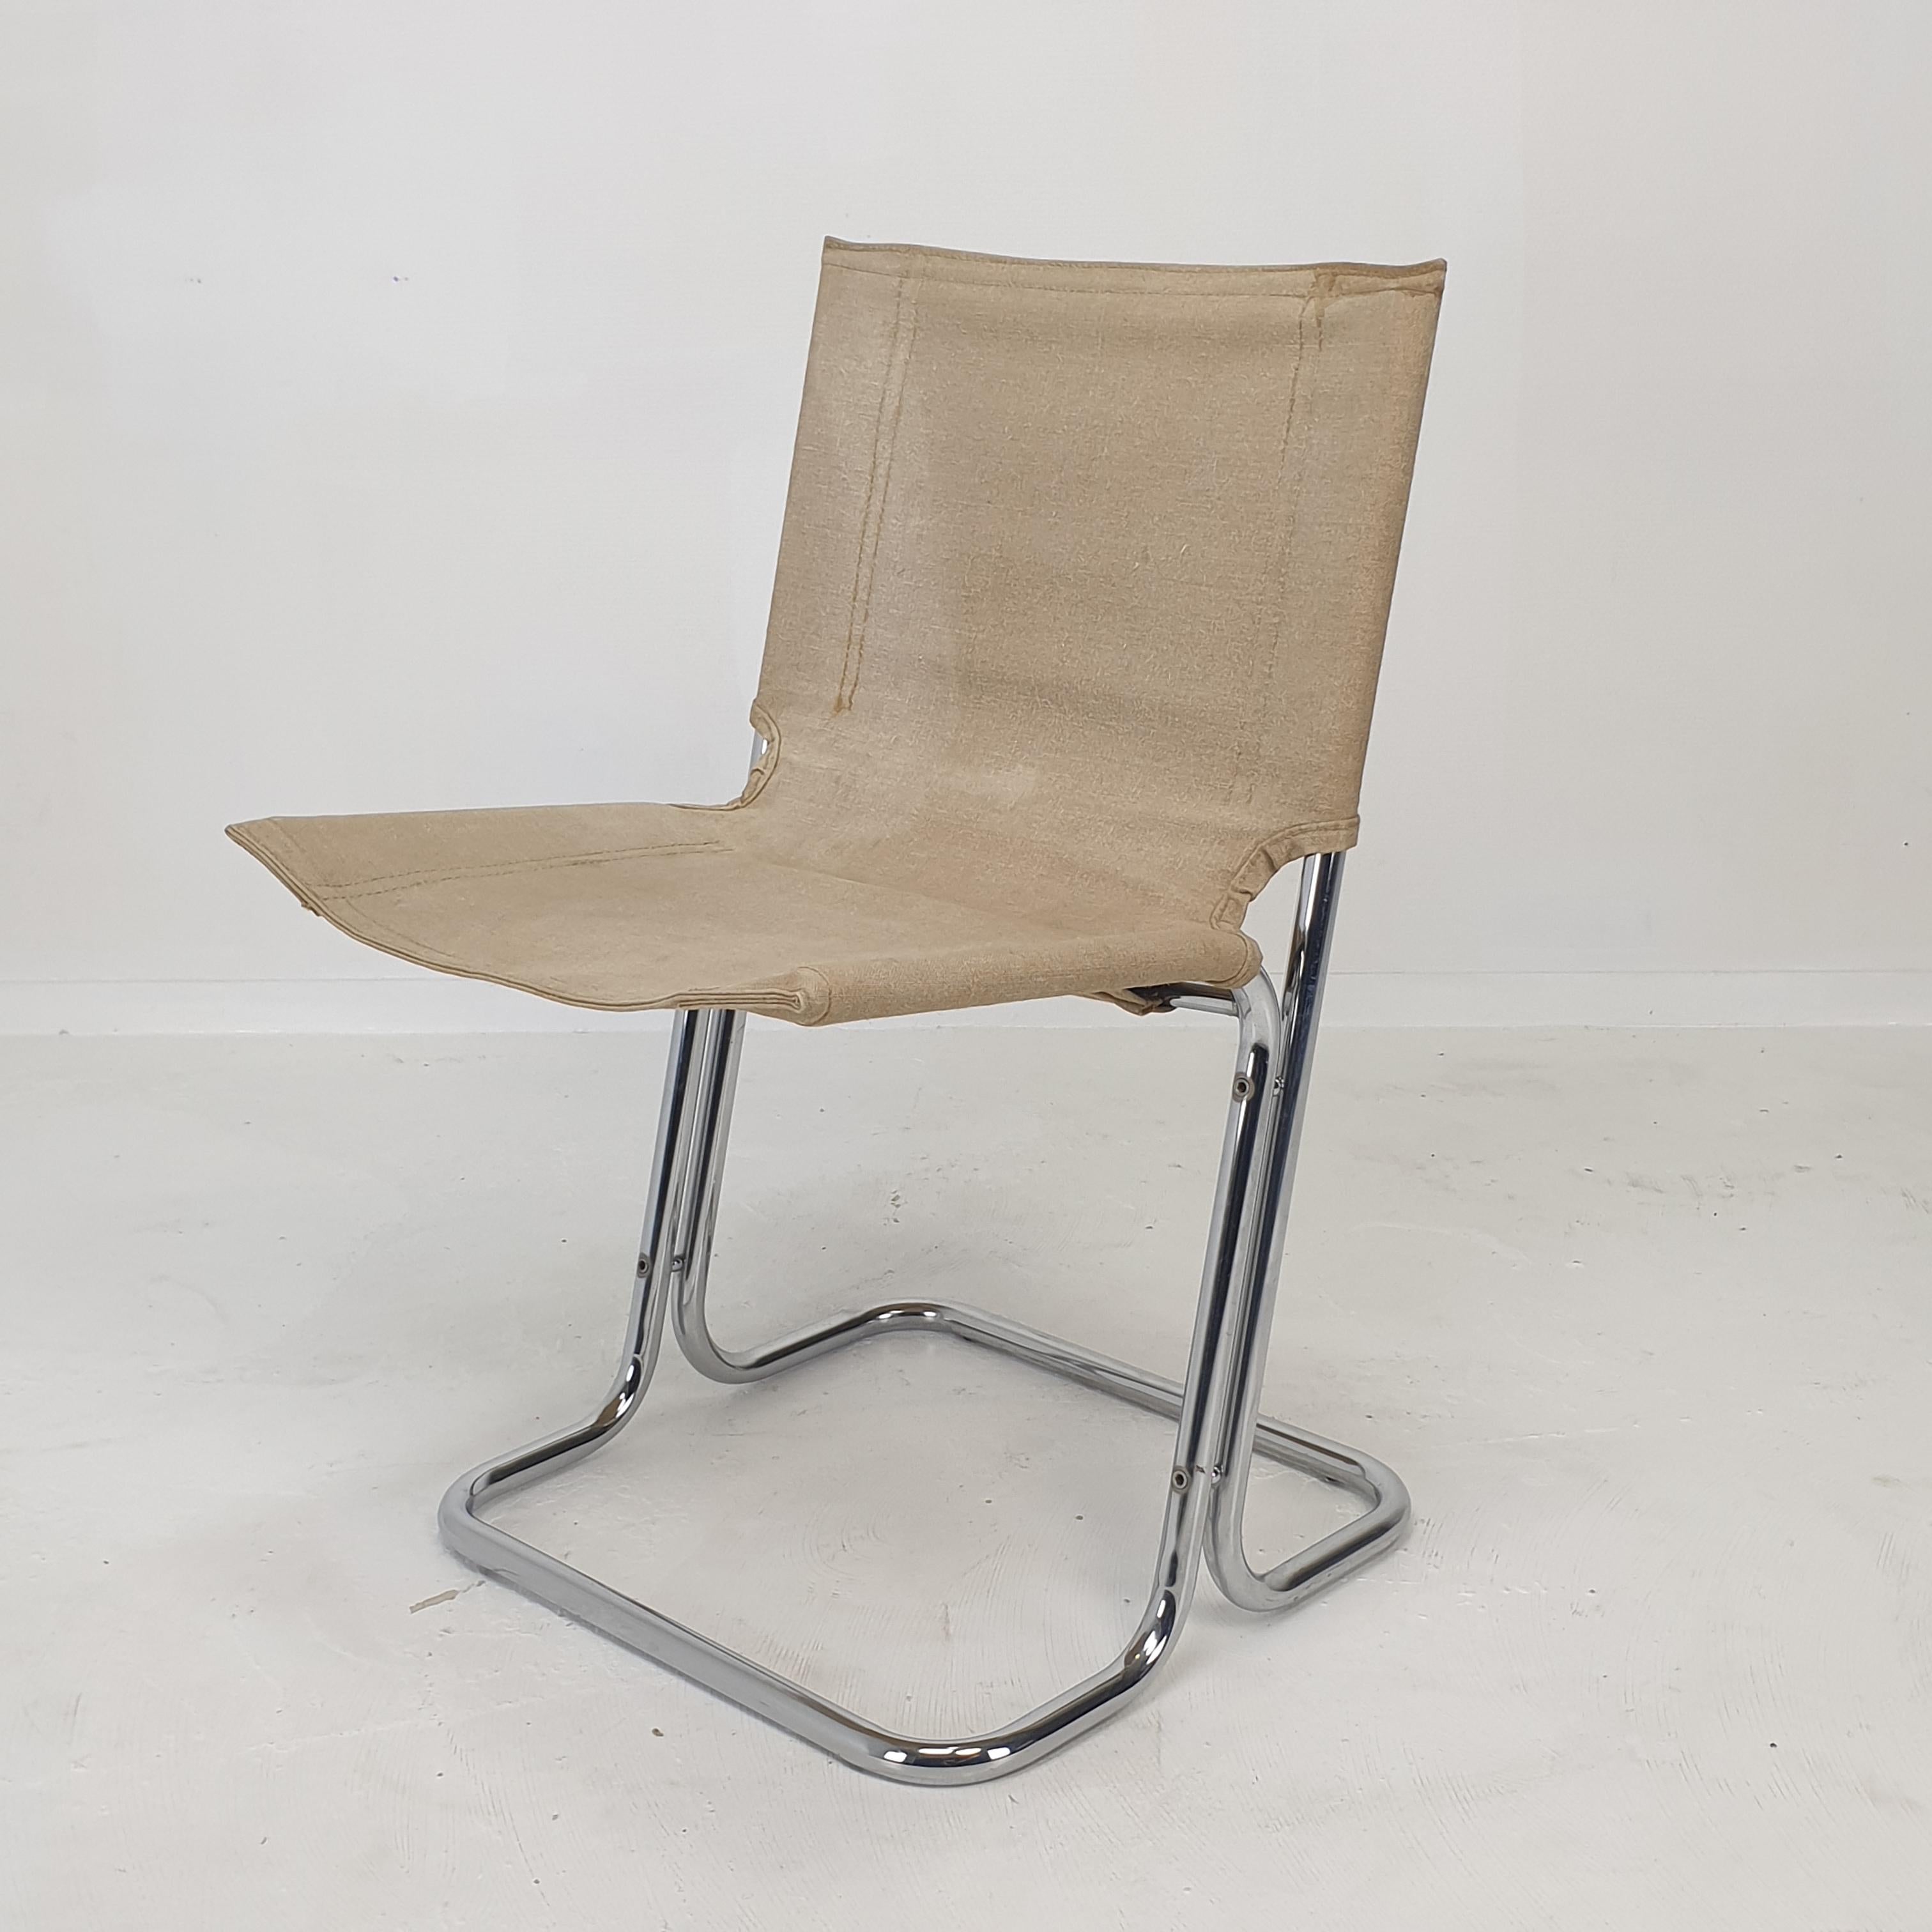 Late 20th Century Set of 2 Italian Canvas and Chromed Metal Chairs, 1970's For Sale